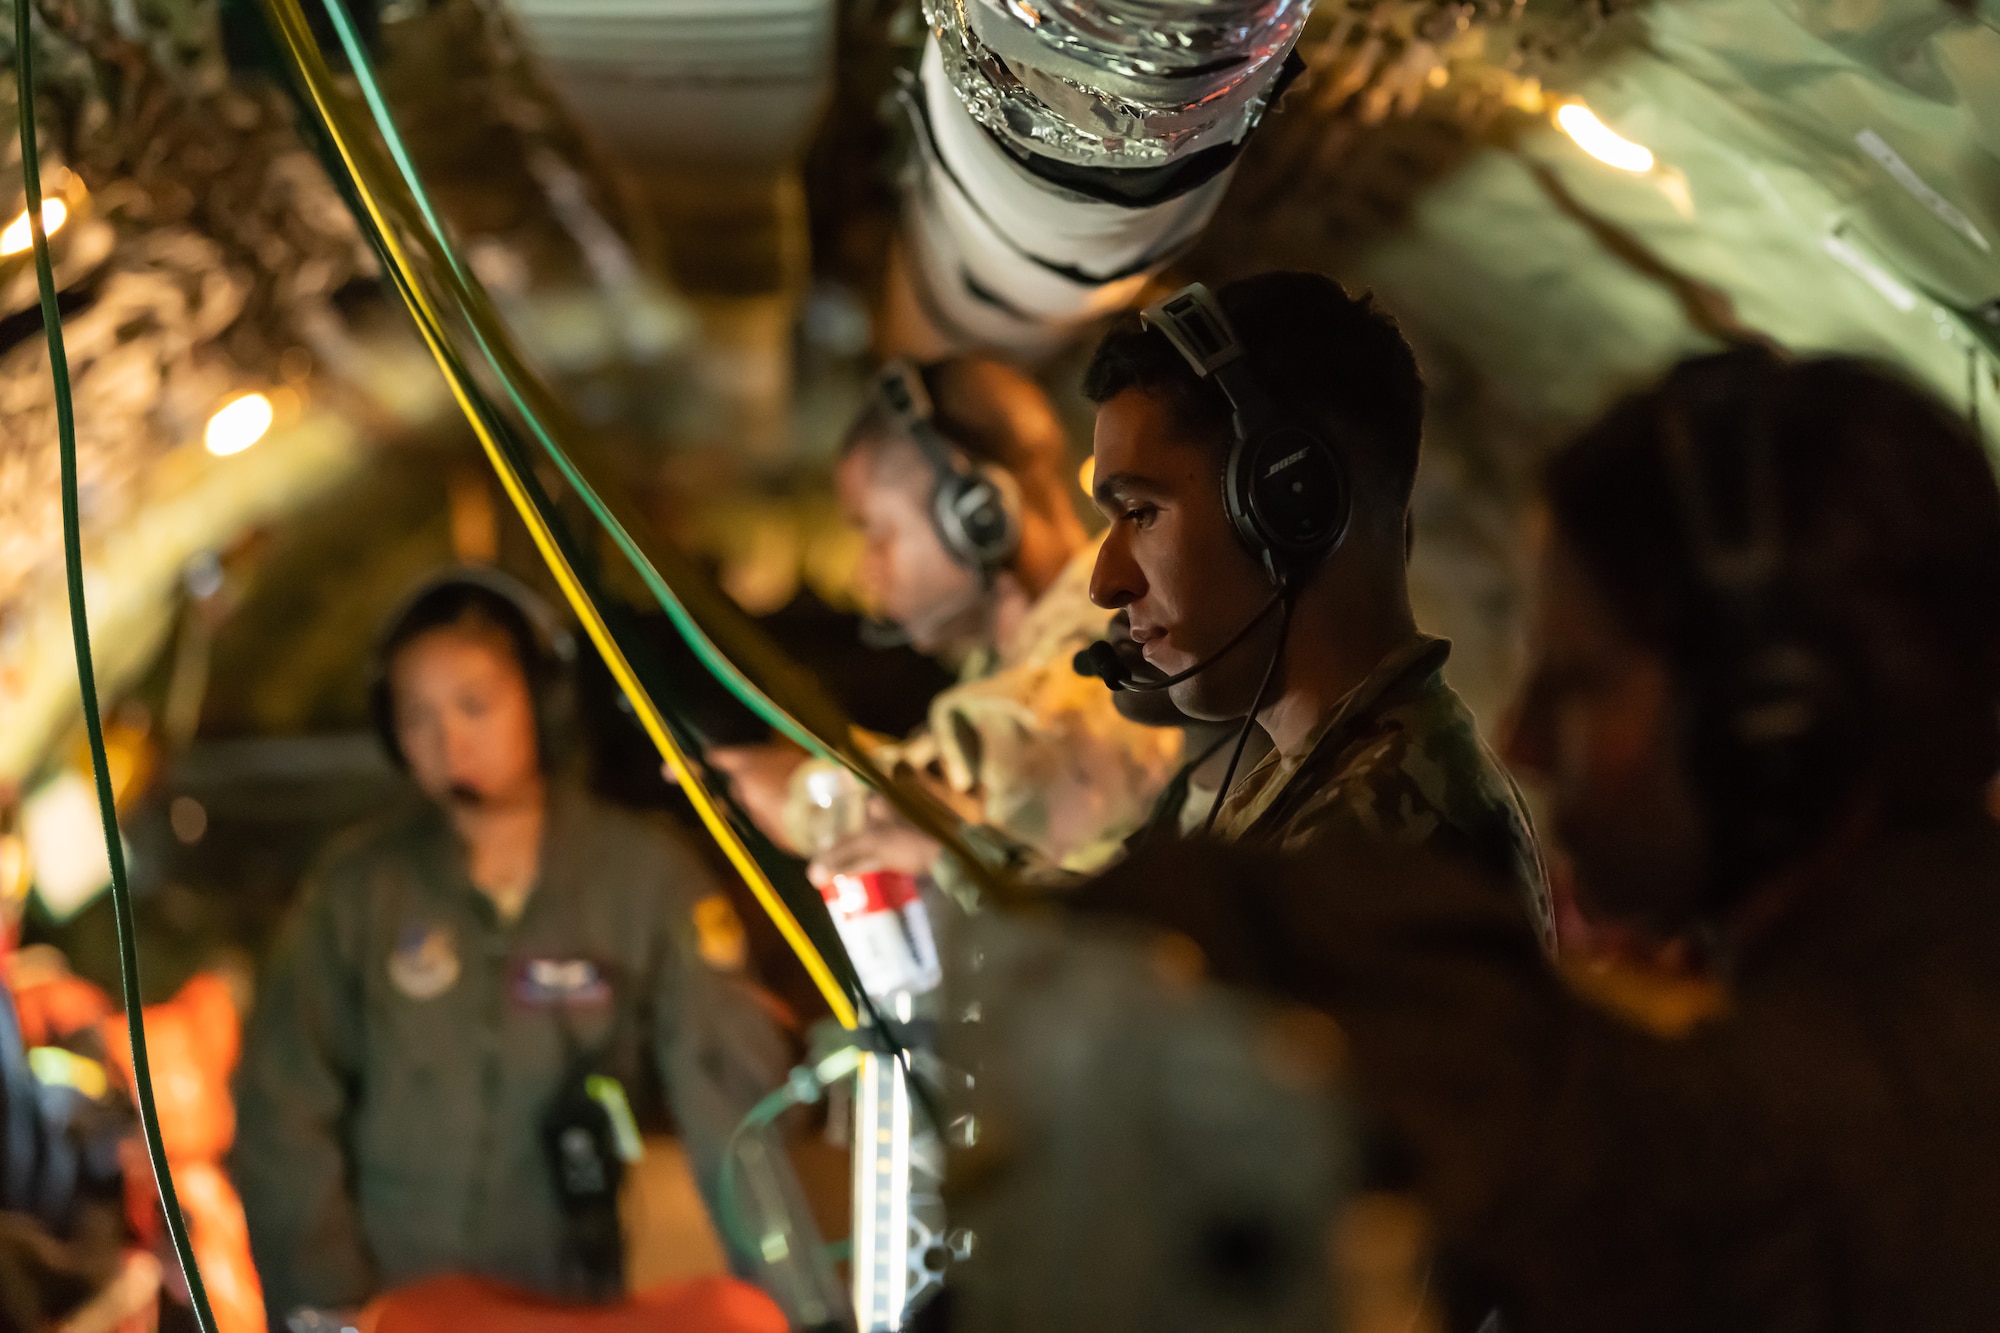 Airmen from the 18th Aeromedical Evacuation Squadron go over their electronic flight books onboard a KC-135 Stratotanker during an exercise May 8th, 2019, out of Kadena Air Base, Japan. The 18th AES maintains a forward operating presence and supports medical contingencies in a free-and-open Indo-Pacific. (U.S. Air Force photo by Airman 1st Class Matthew Seefeldt)